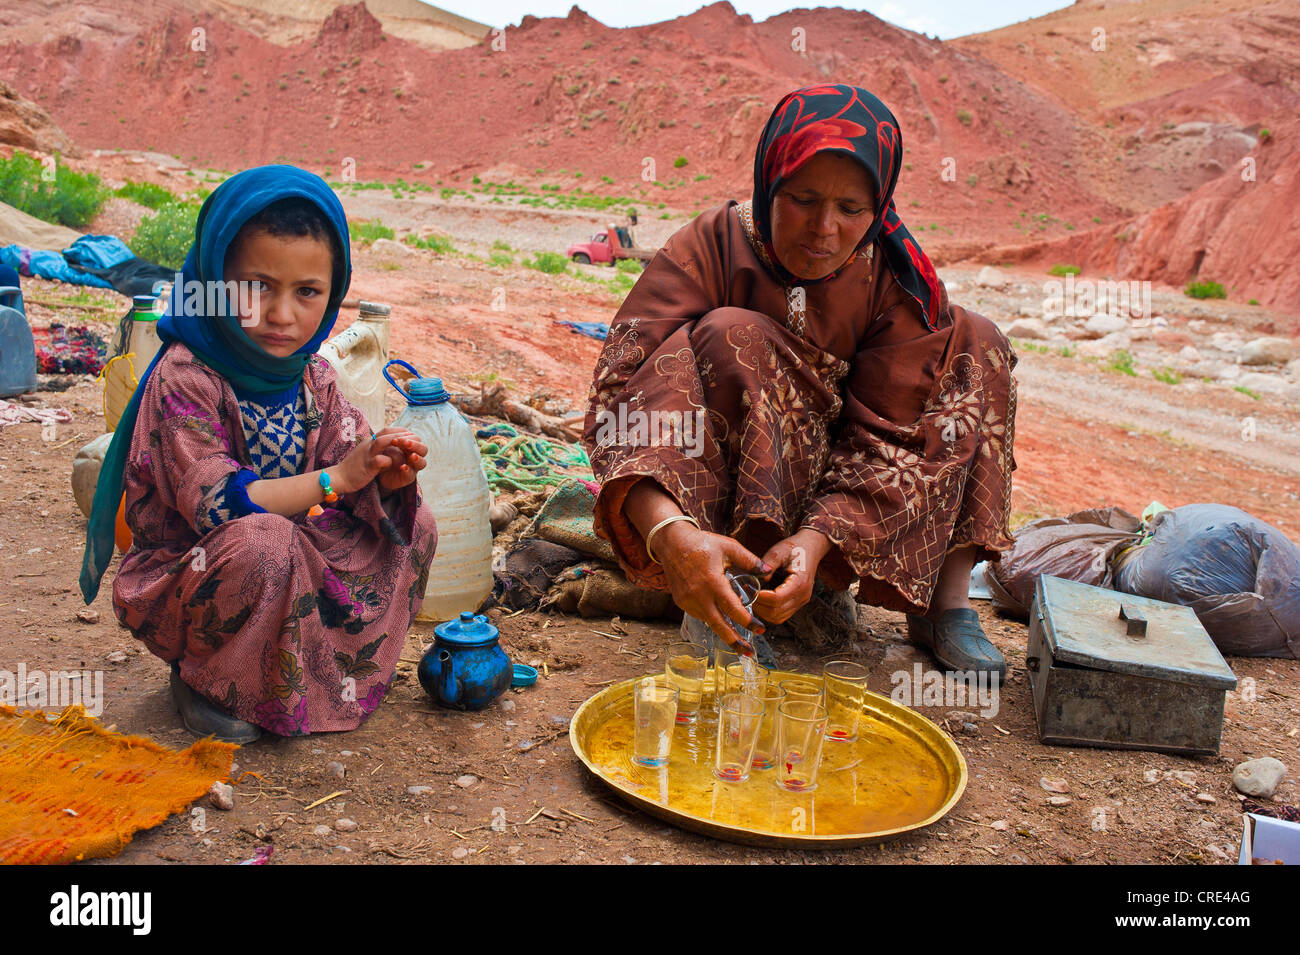 Cave dwelling nomads, a woman and a little girl sitting in front of a cave dwelling, the woman is cleaning tea glasses on a Stock Photo